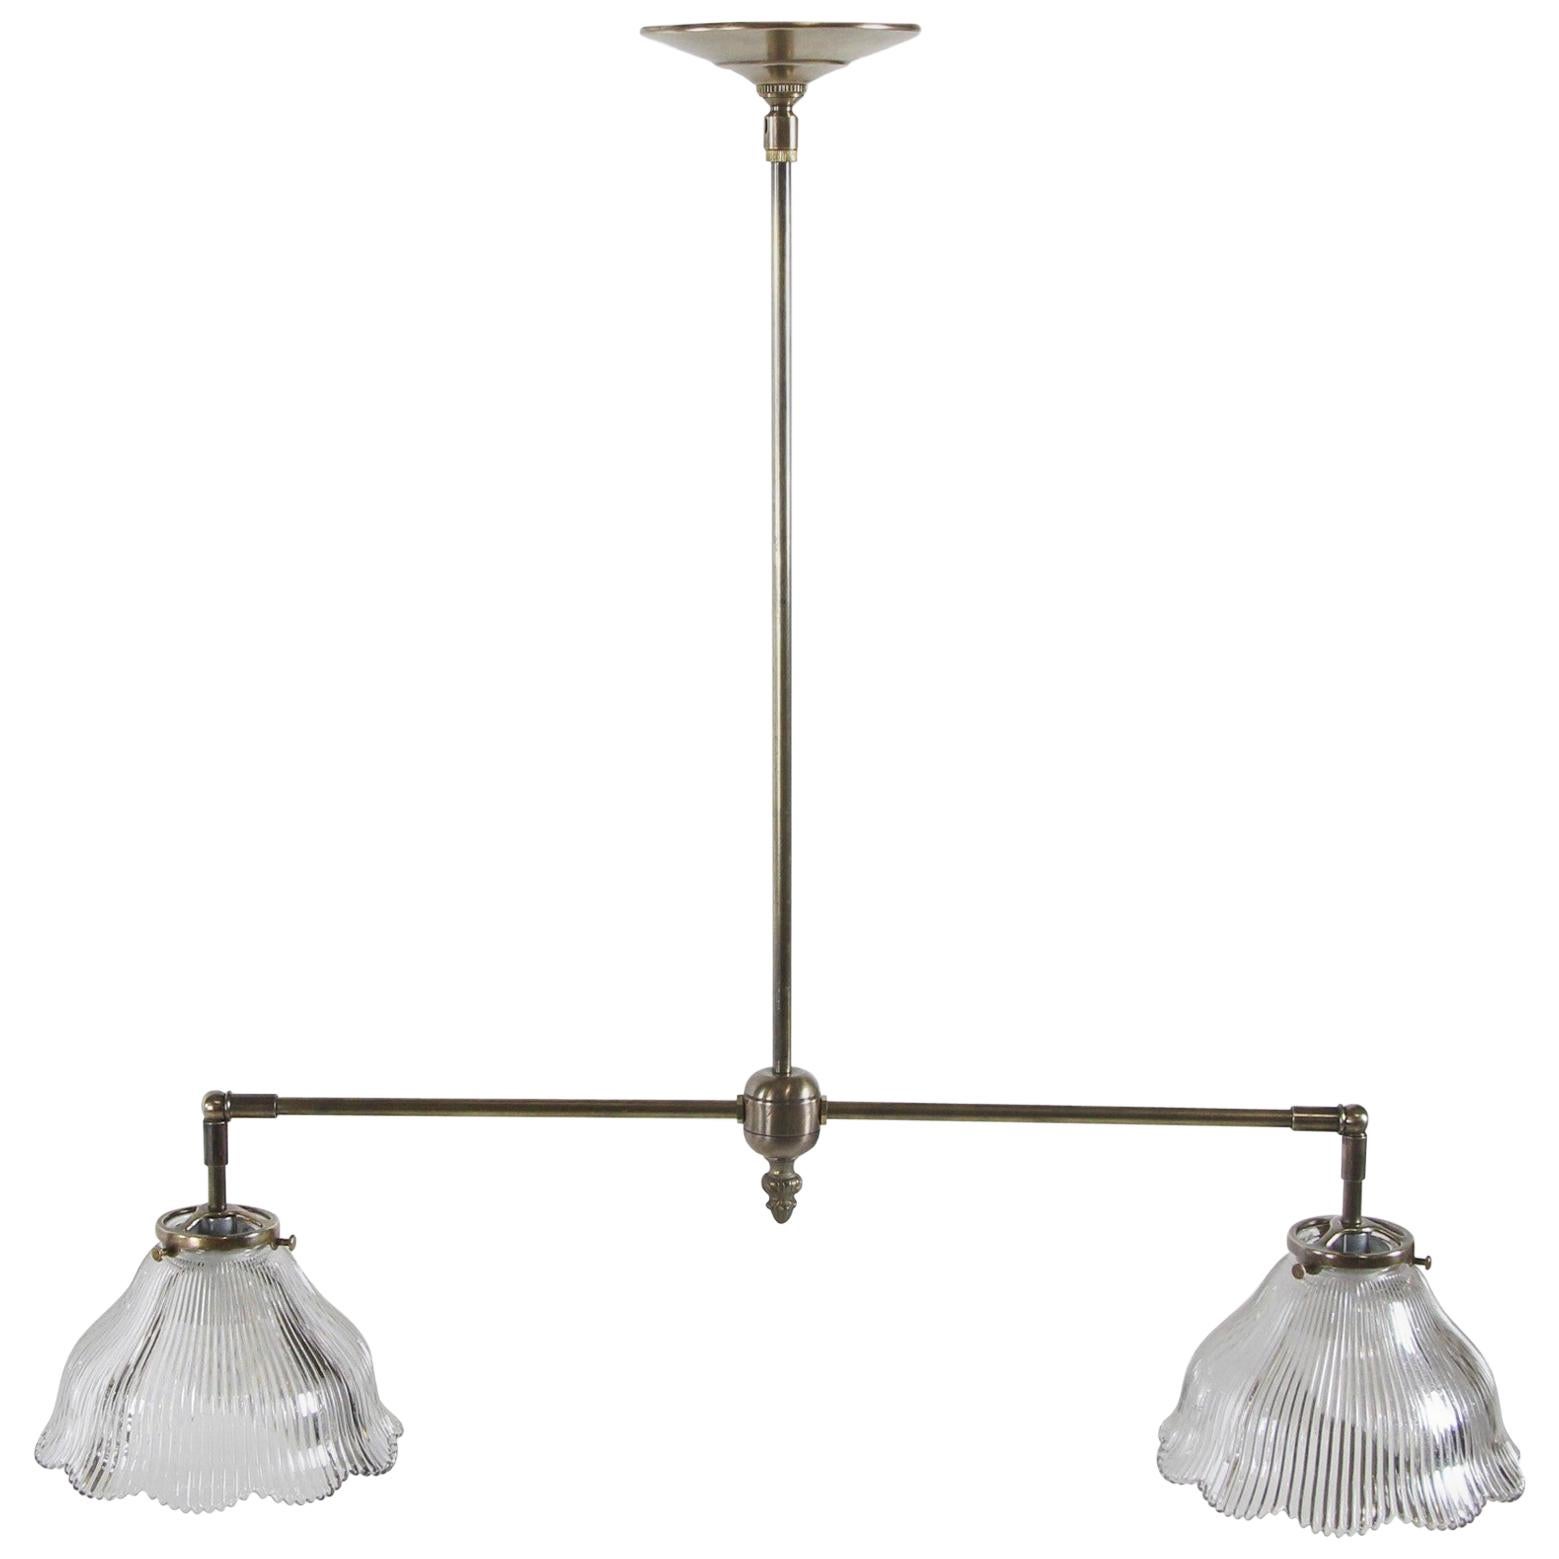 2010s Brass Pendant Light with Two Antique Ruffled Prism Glass Shades